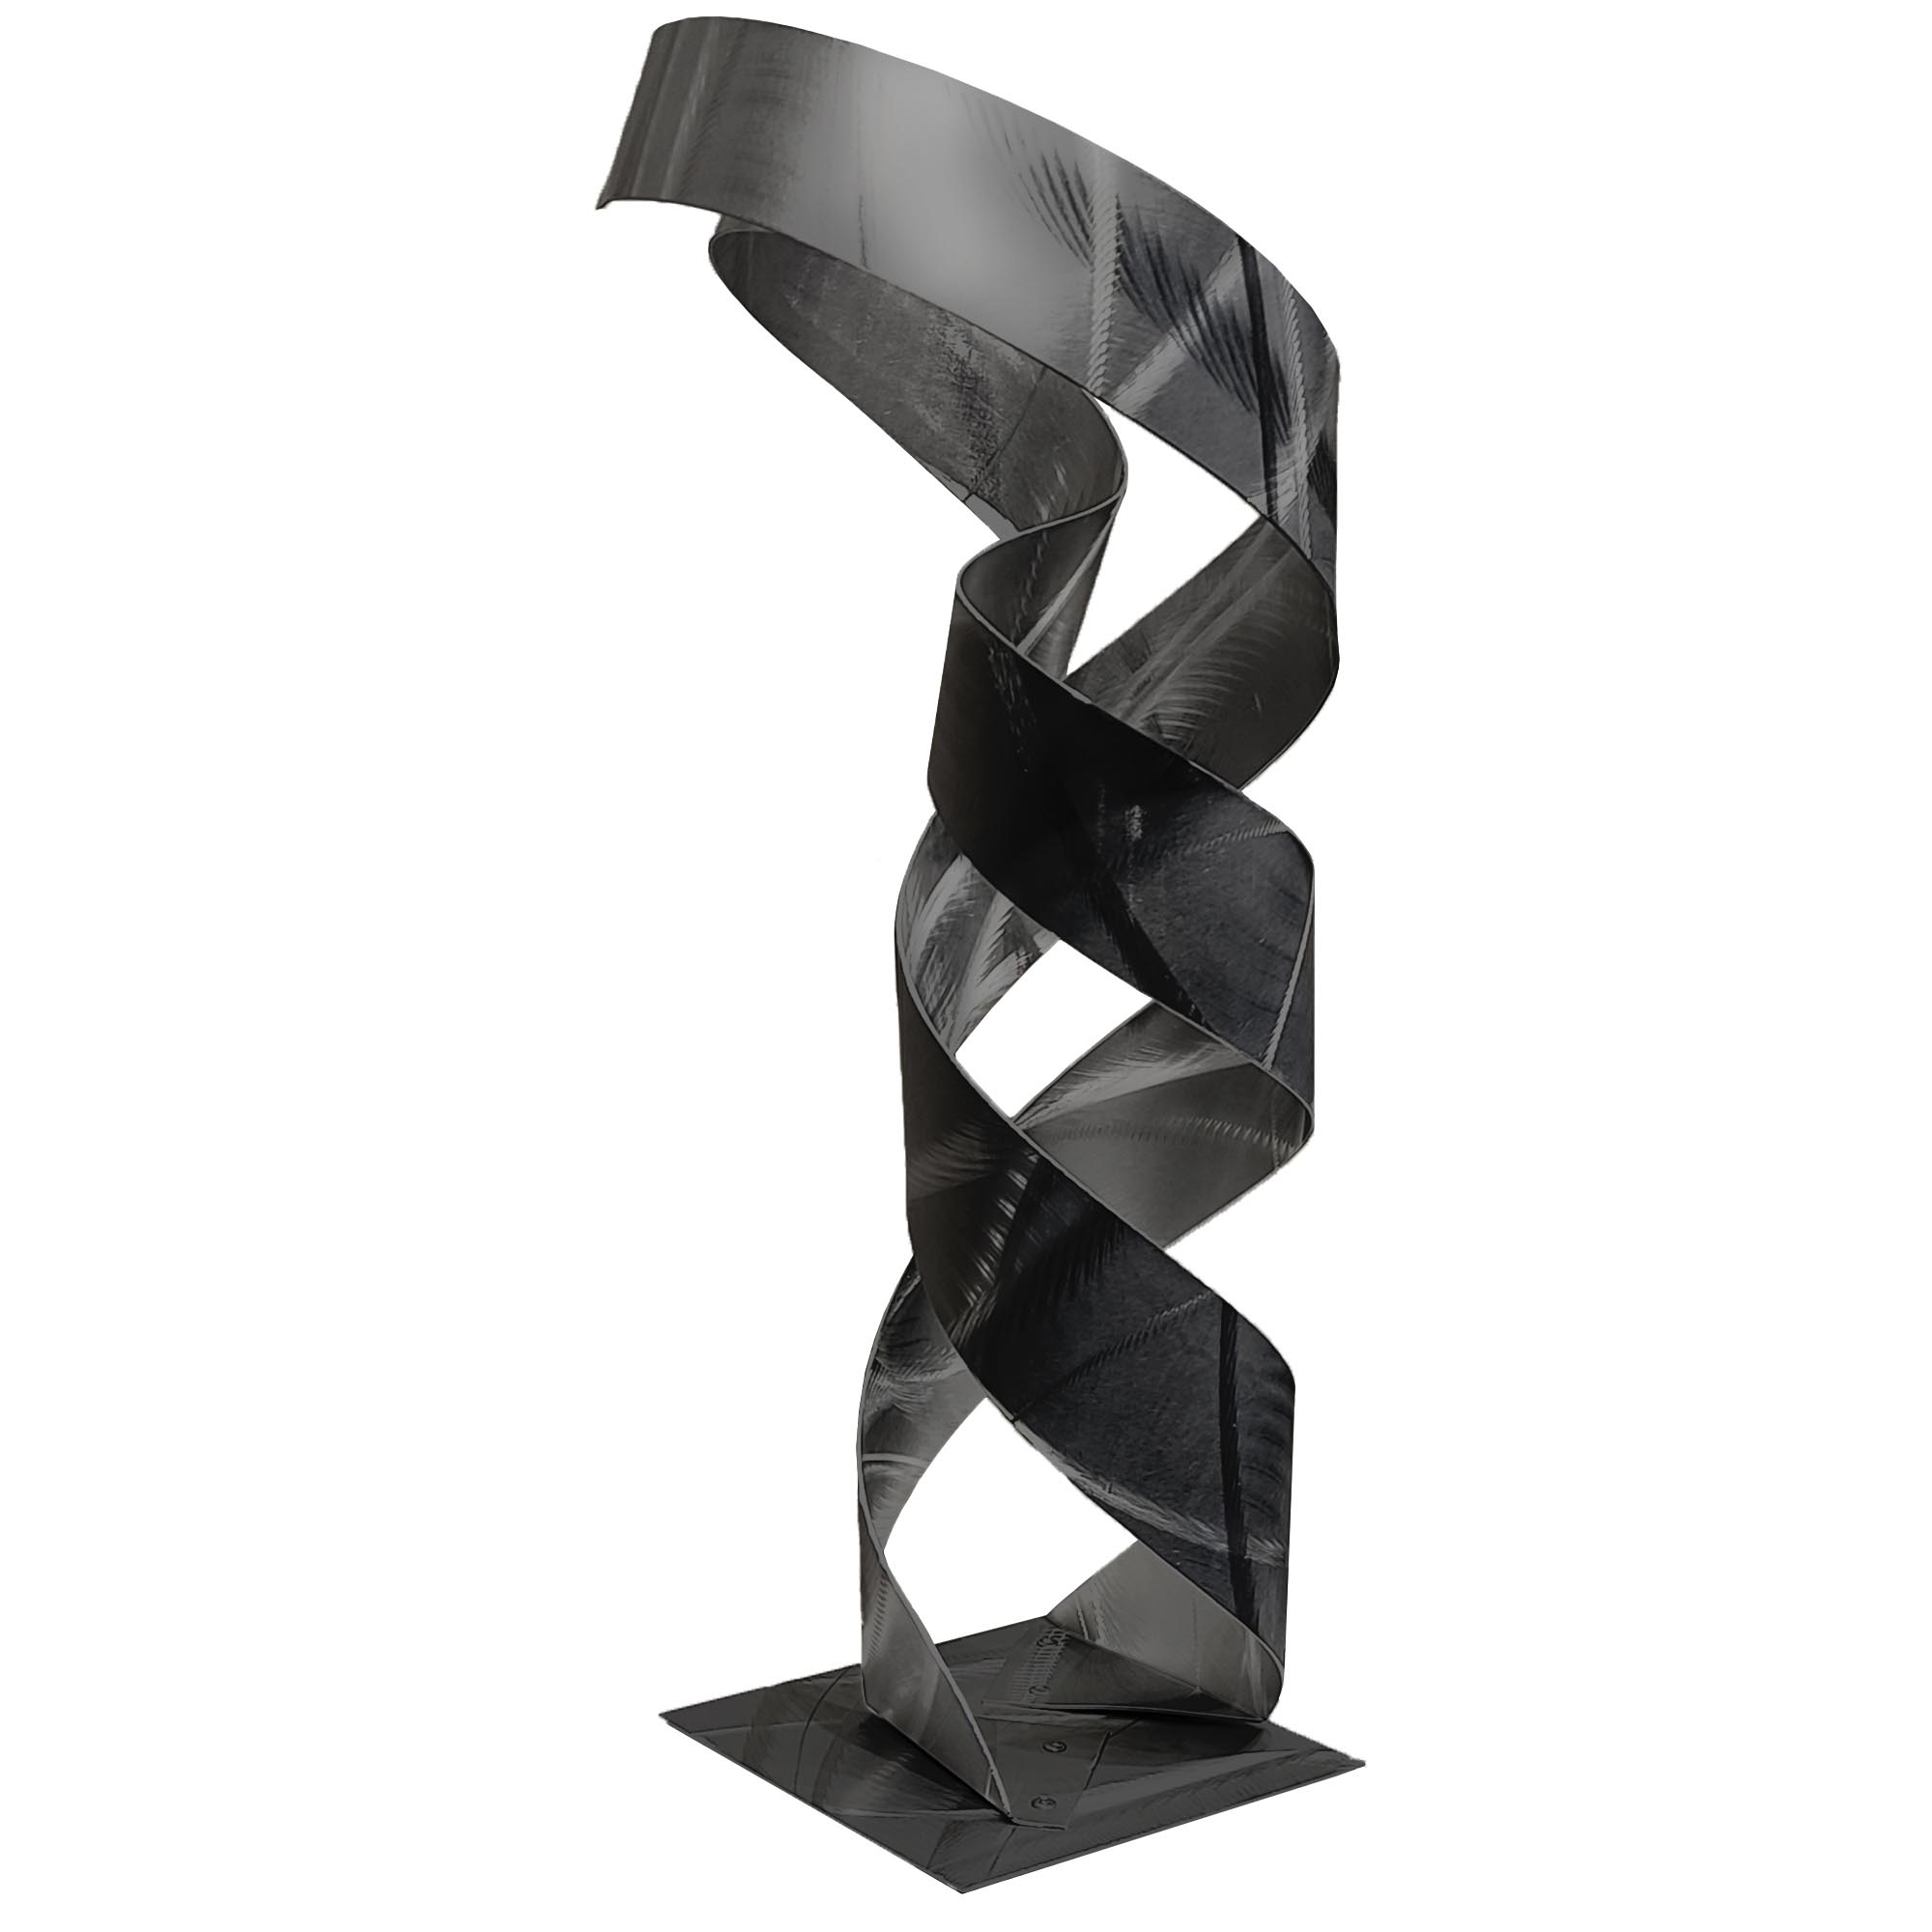 Continuum in Black by Carlos Jacobs - Metal Sculpture, Modern Decor (10x25in.) - Image 2